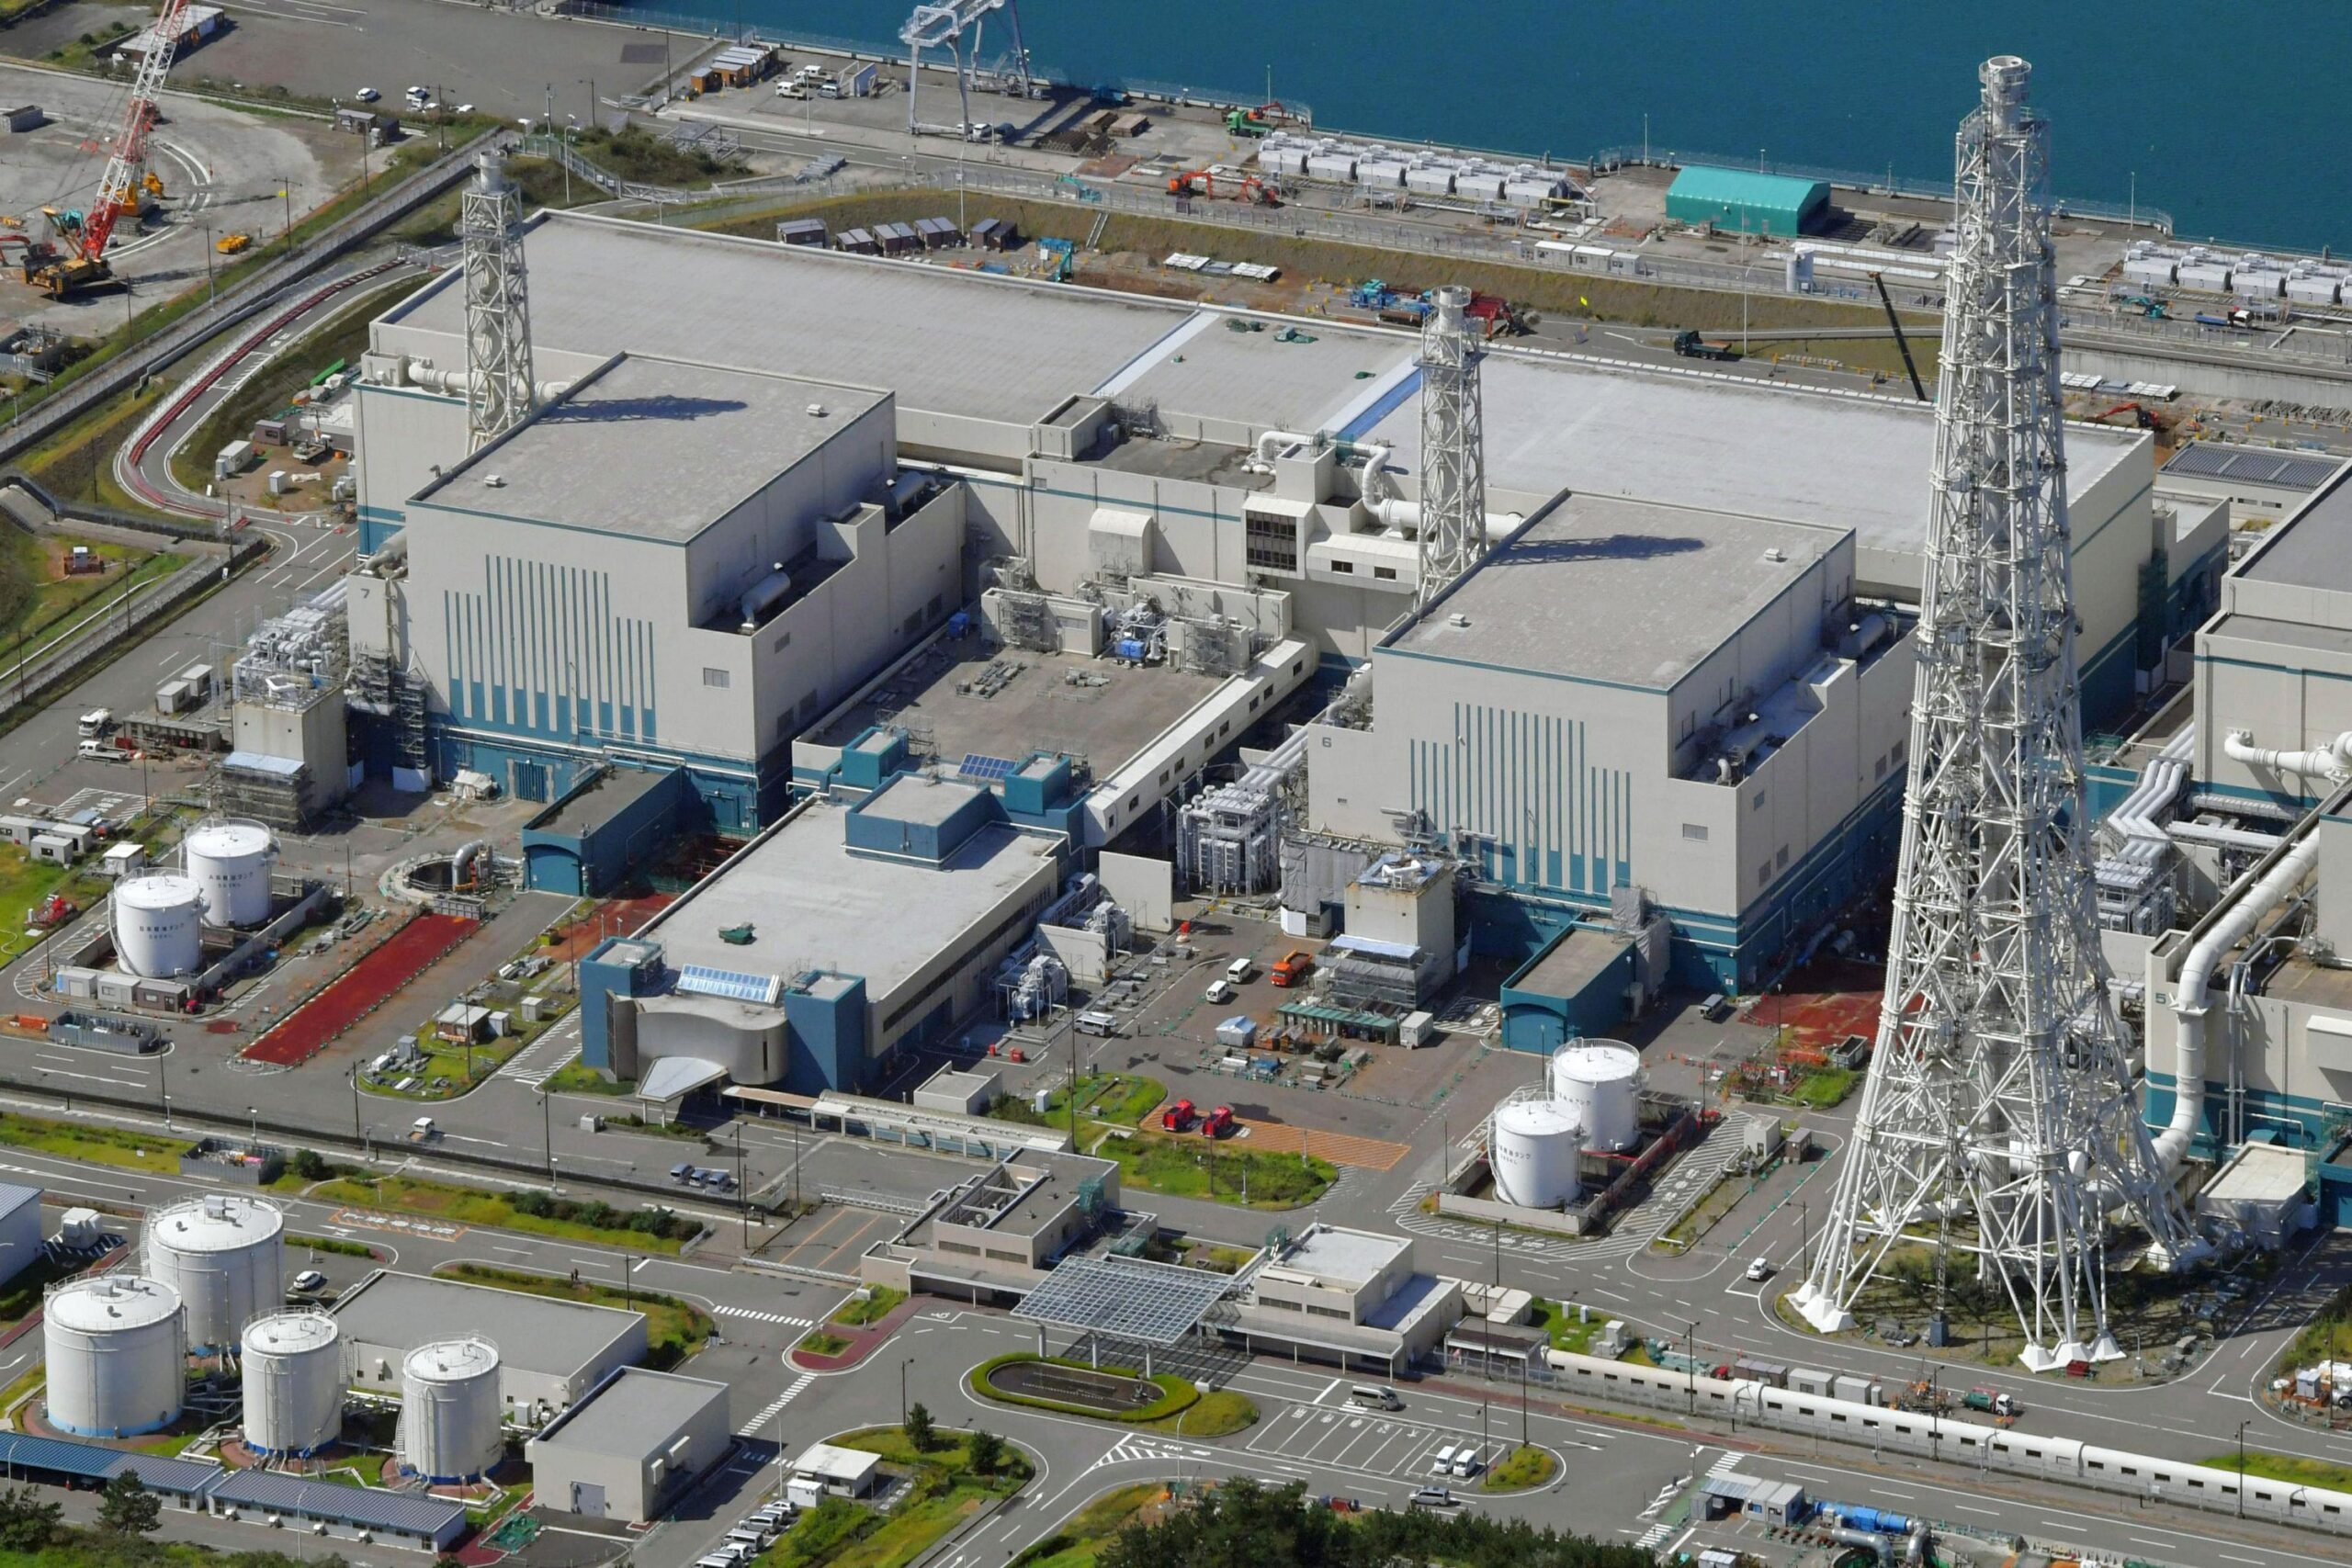 Japanese regulators say TEPCO nuclear plant prone to attack - Associated Press